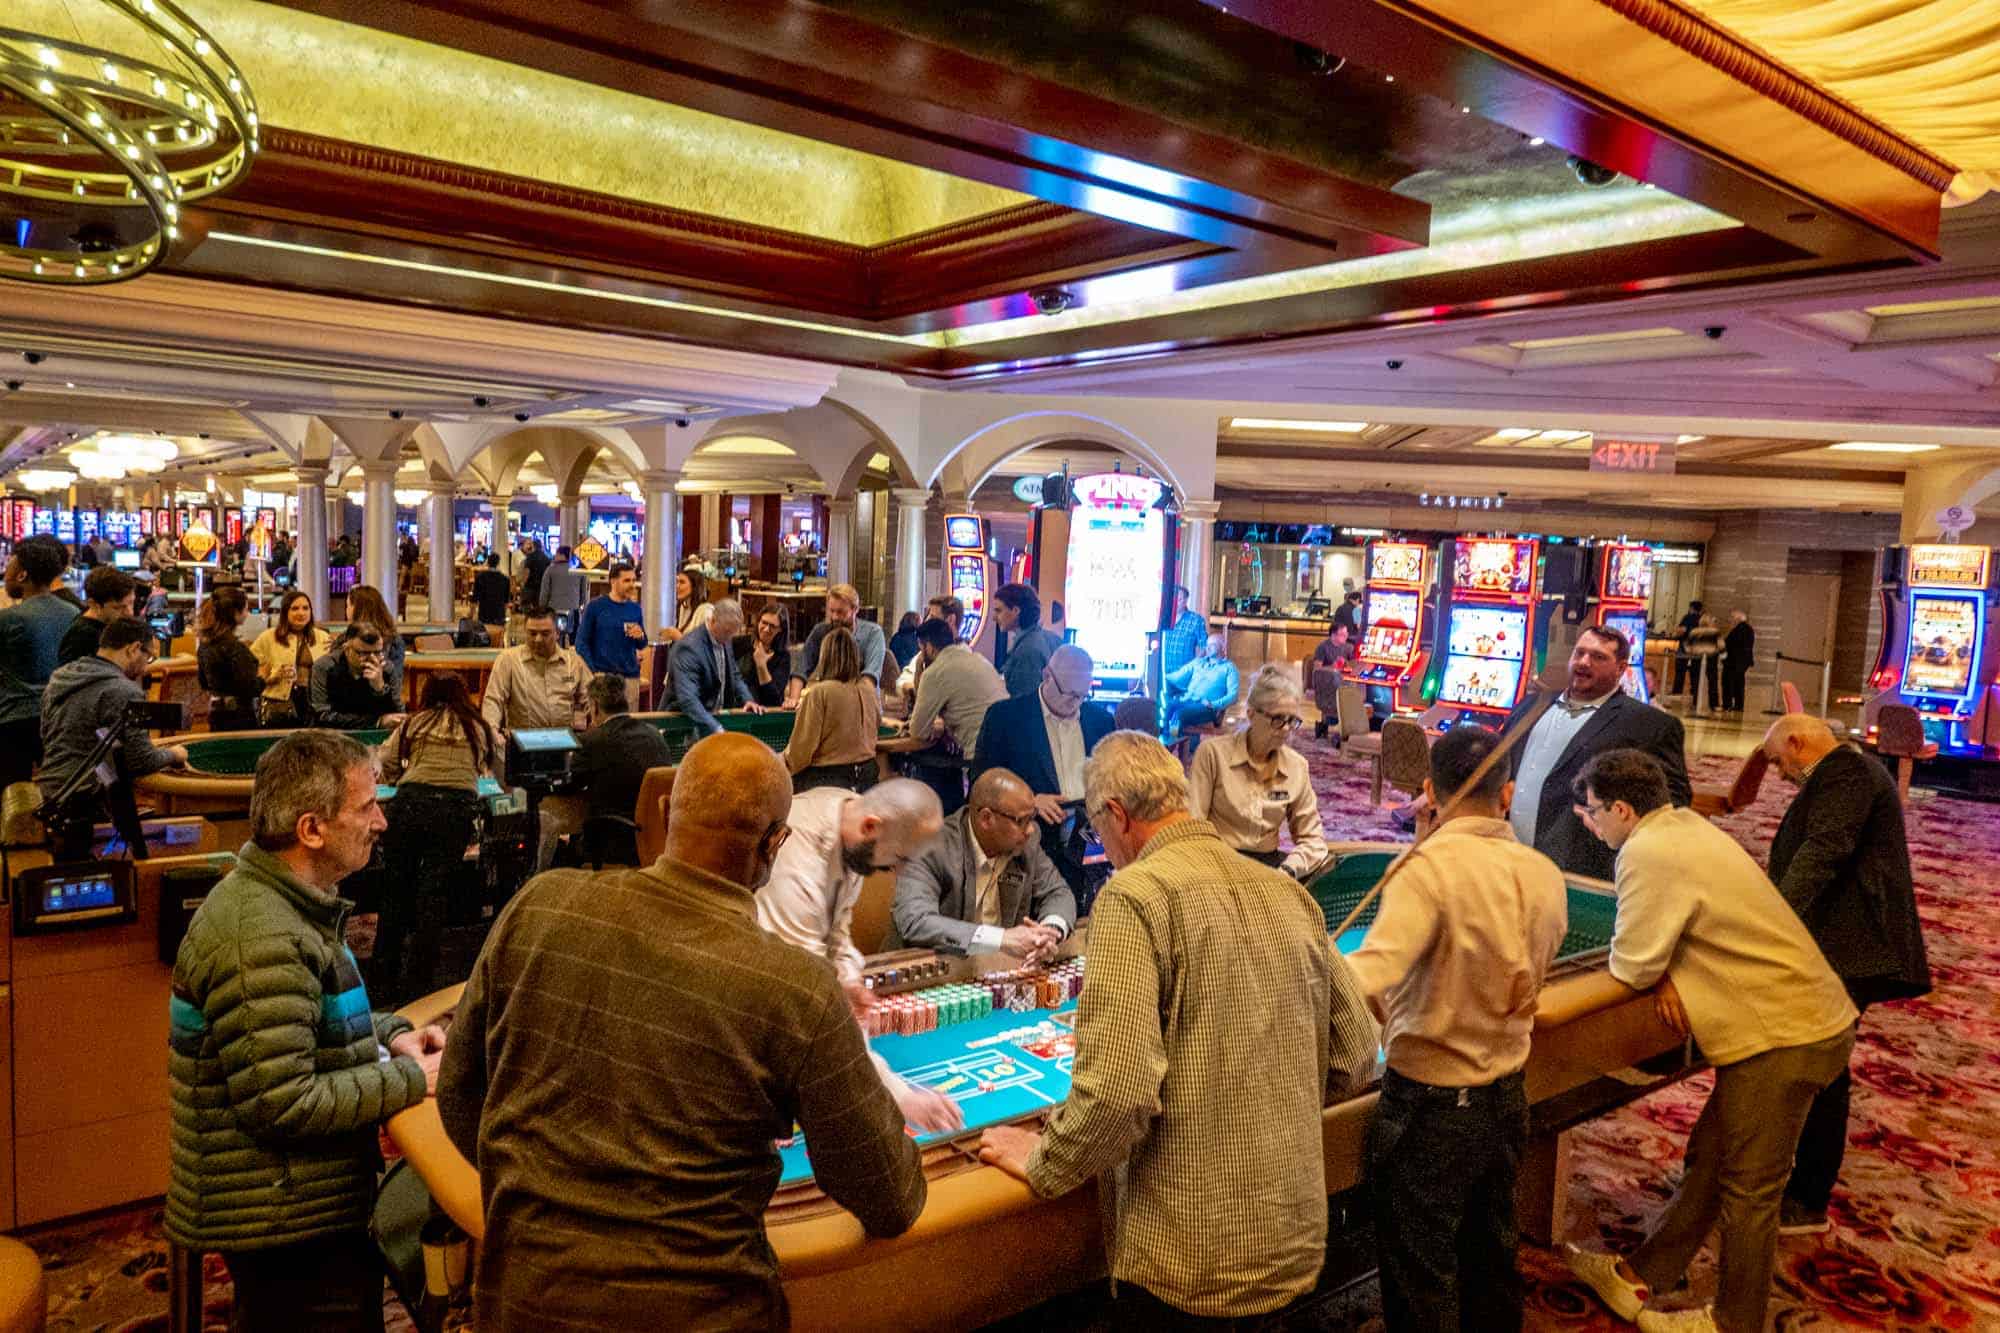 People playing table games in a casino